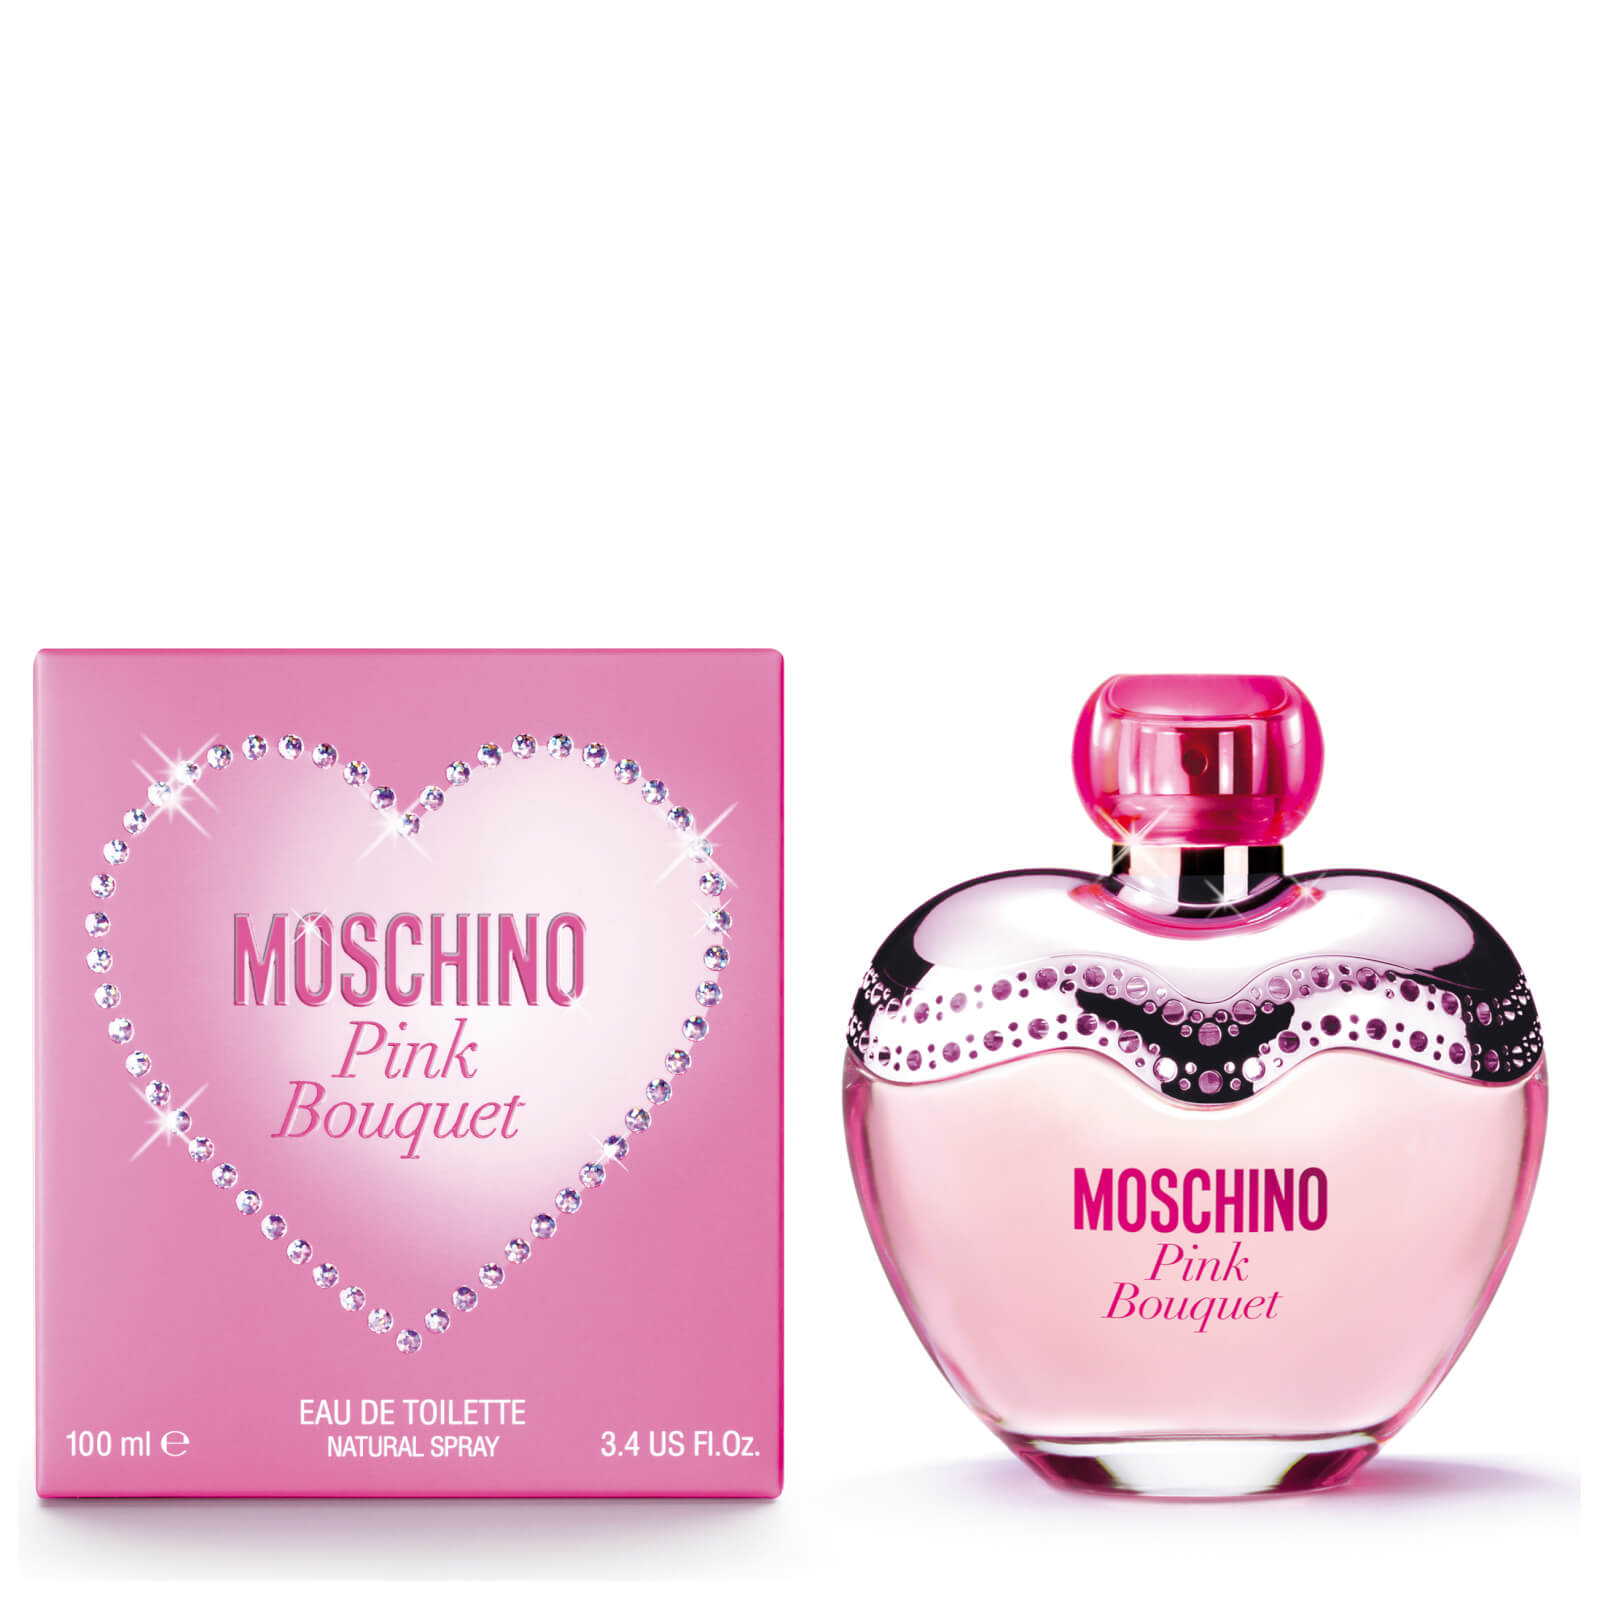 The Italian house of Moschino is launching a new fragrance Pink Bouquet in a flacon shaped like previous editions: Glamour from 2008 and Toujours Glamour from 2010. The new Pink Bouquet brings us a lot of positive energy, youthful freshness and euphoric notes. 
Moschino Pink Bouquet is constructed as a floral-fruity blend with top notes of bergamot, pineapple sorbet and raspberry. A heart incorporates jasmine, pink lily of the valley, violet and peony petal, while base notes leave a juicy trail of peach, gingerbread and musk. 
The fragrance was released in June 2012. Outer carton of the edition accompanies the romantic theme; it is also pink and decorated with a heart made of luminous crystals framing the name of the new fragrance. Face of the campaign is Kendra Spears. The fragrance will be accompanied by promo posters and TV advertisement. The nose behind this fragrance is Olivier Pescheux.